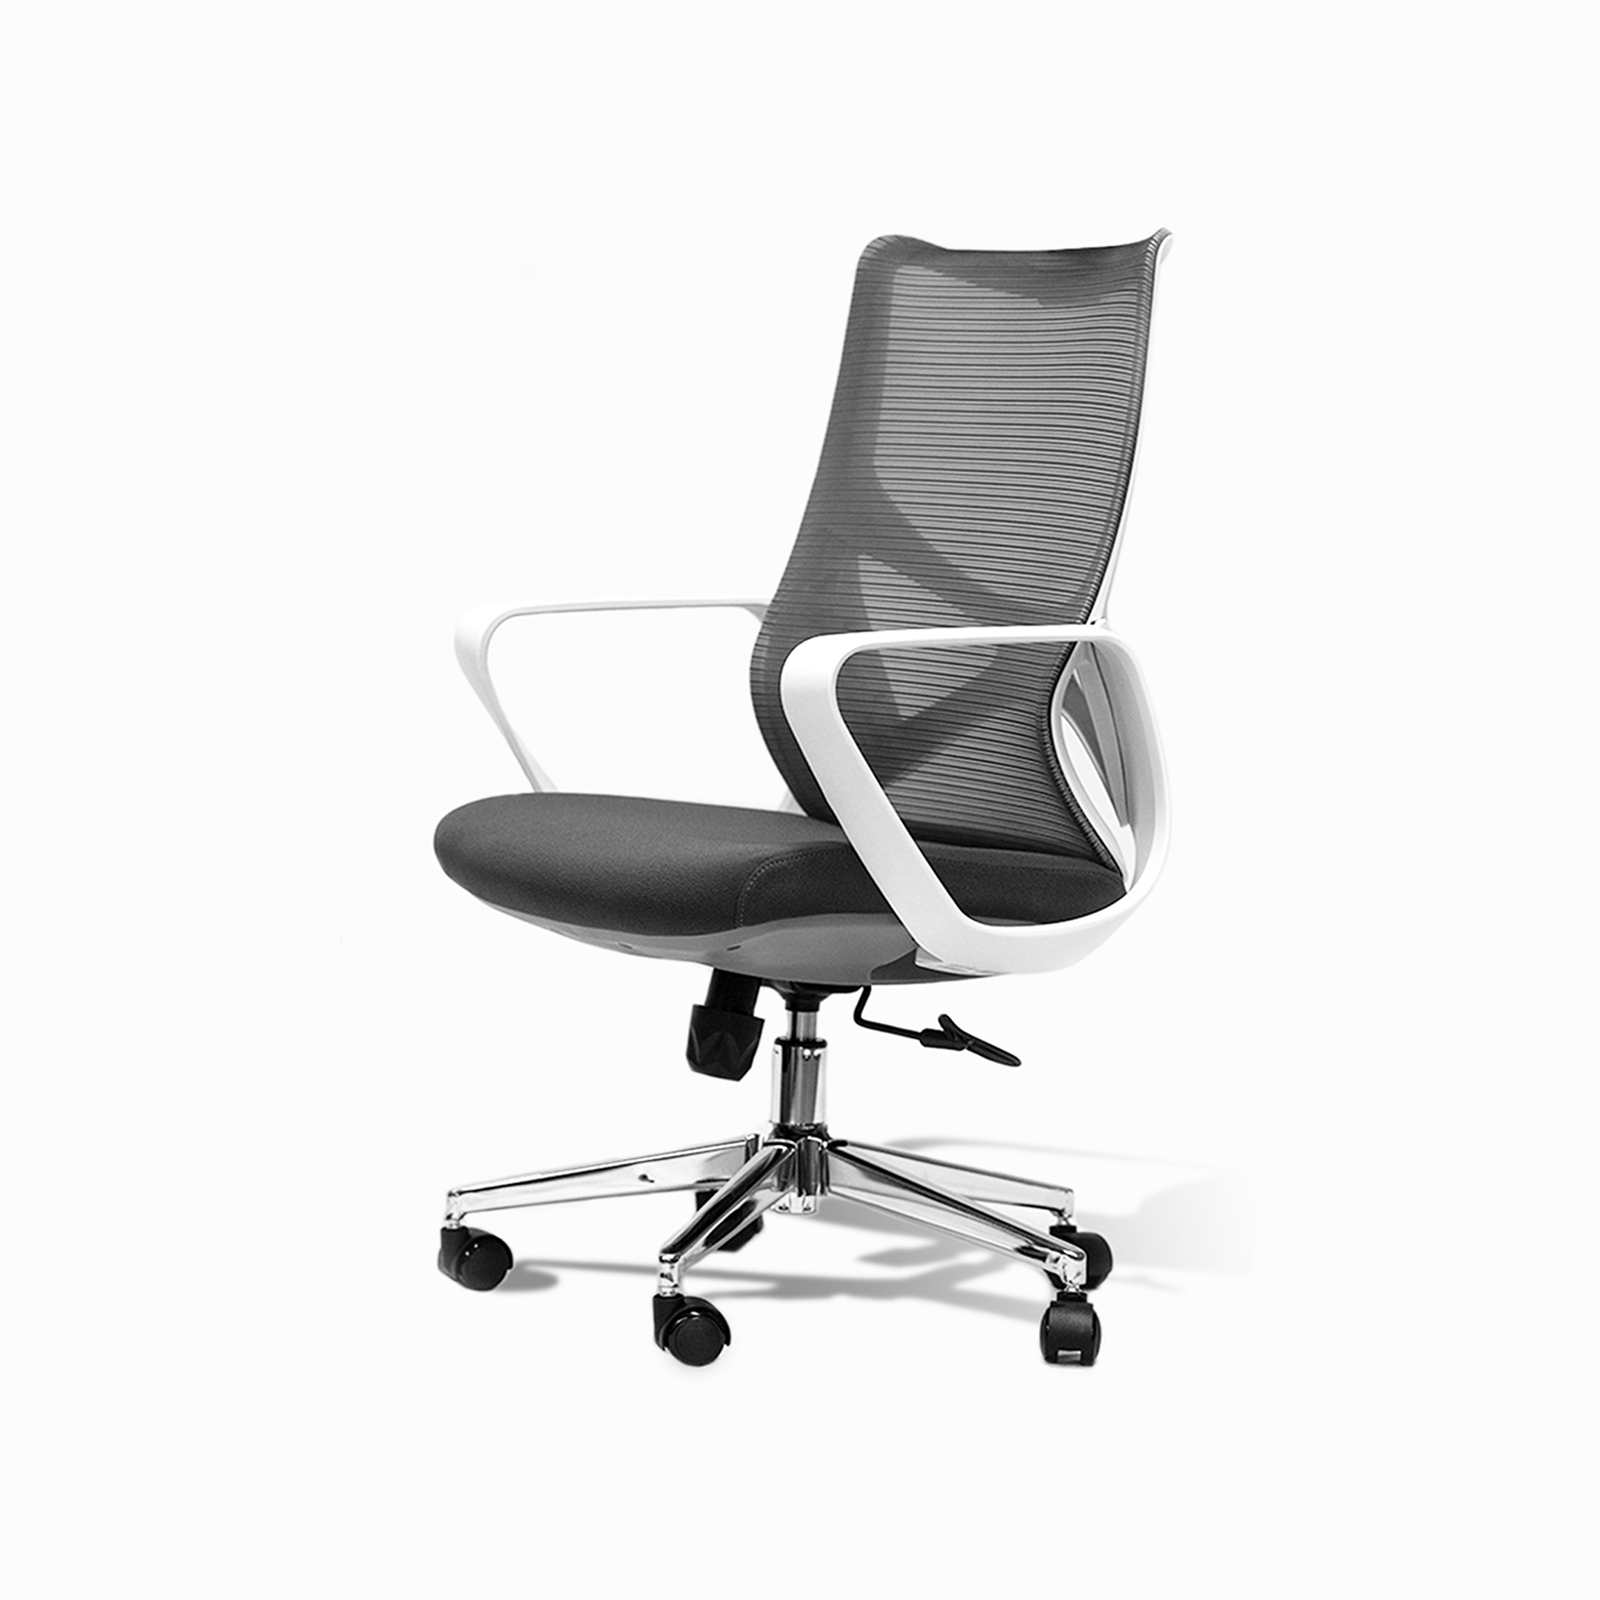 MIUZ COSMO Chair Adjustable Breathable Ergonomic Mesh Office Computer Chair with Lumbar Support Swivel